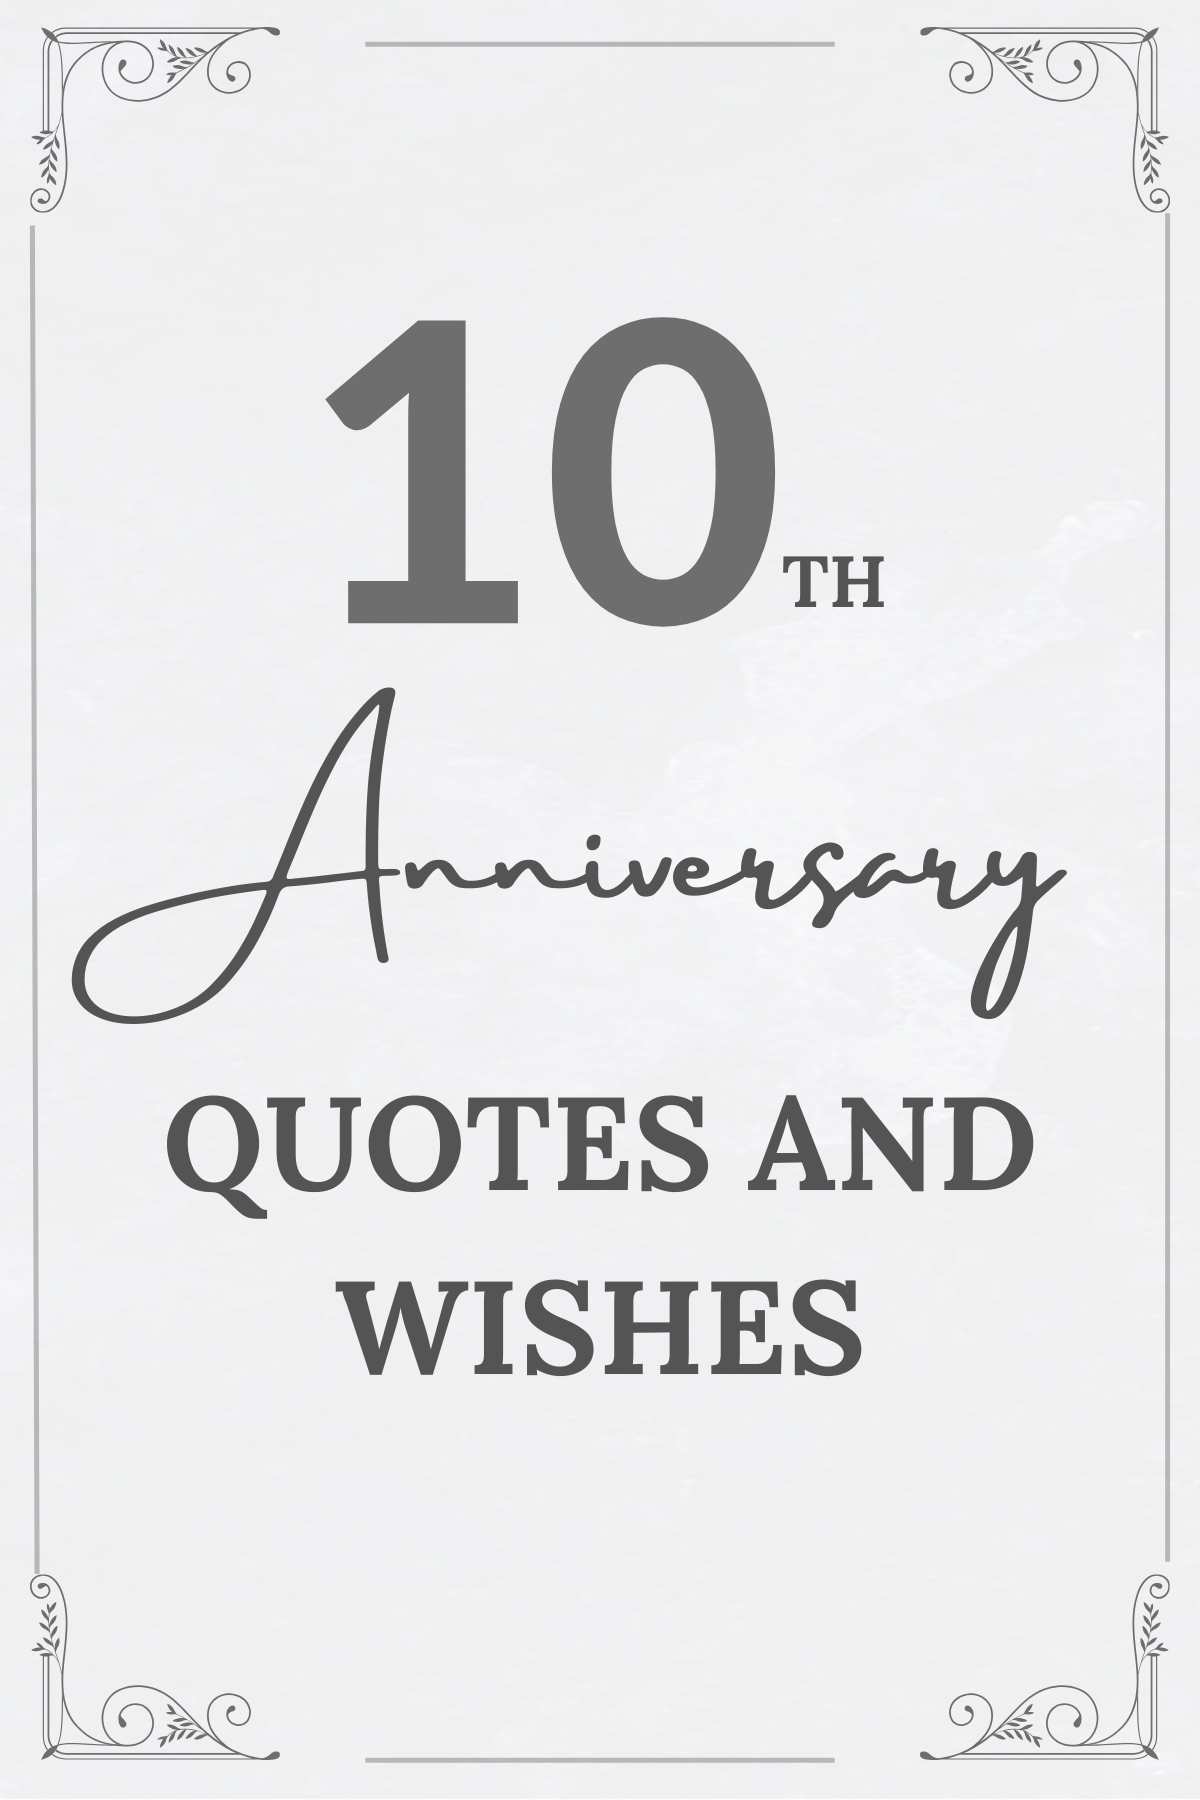 10th anniversary quotes and wishes